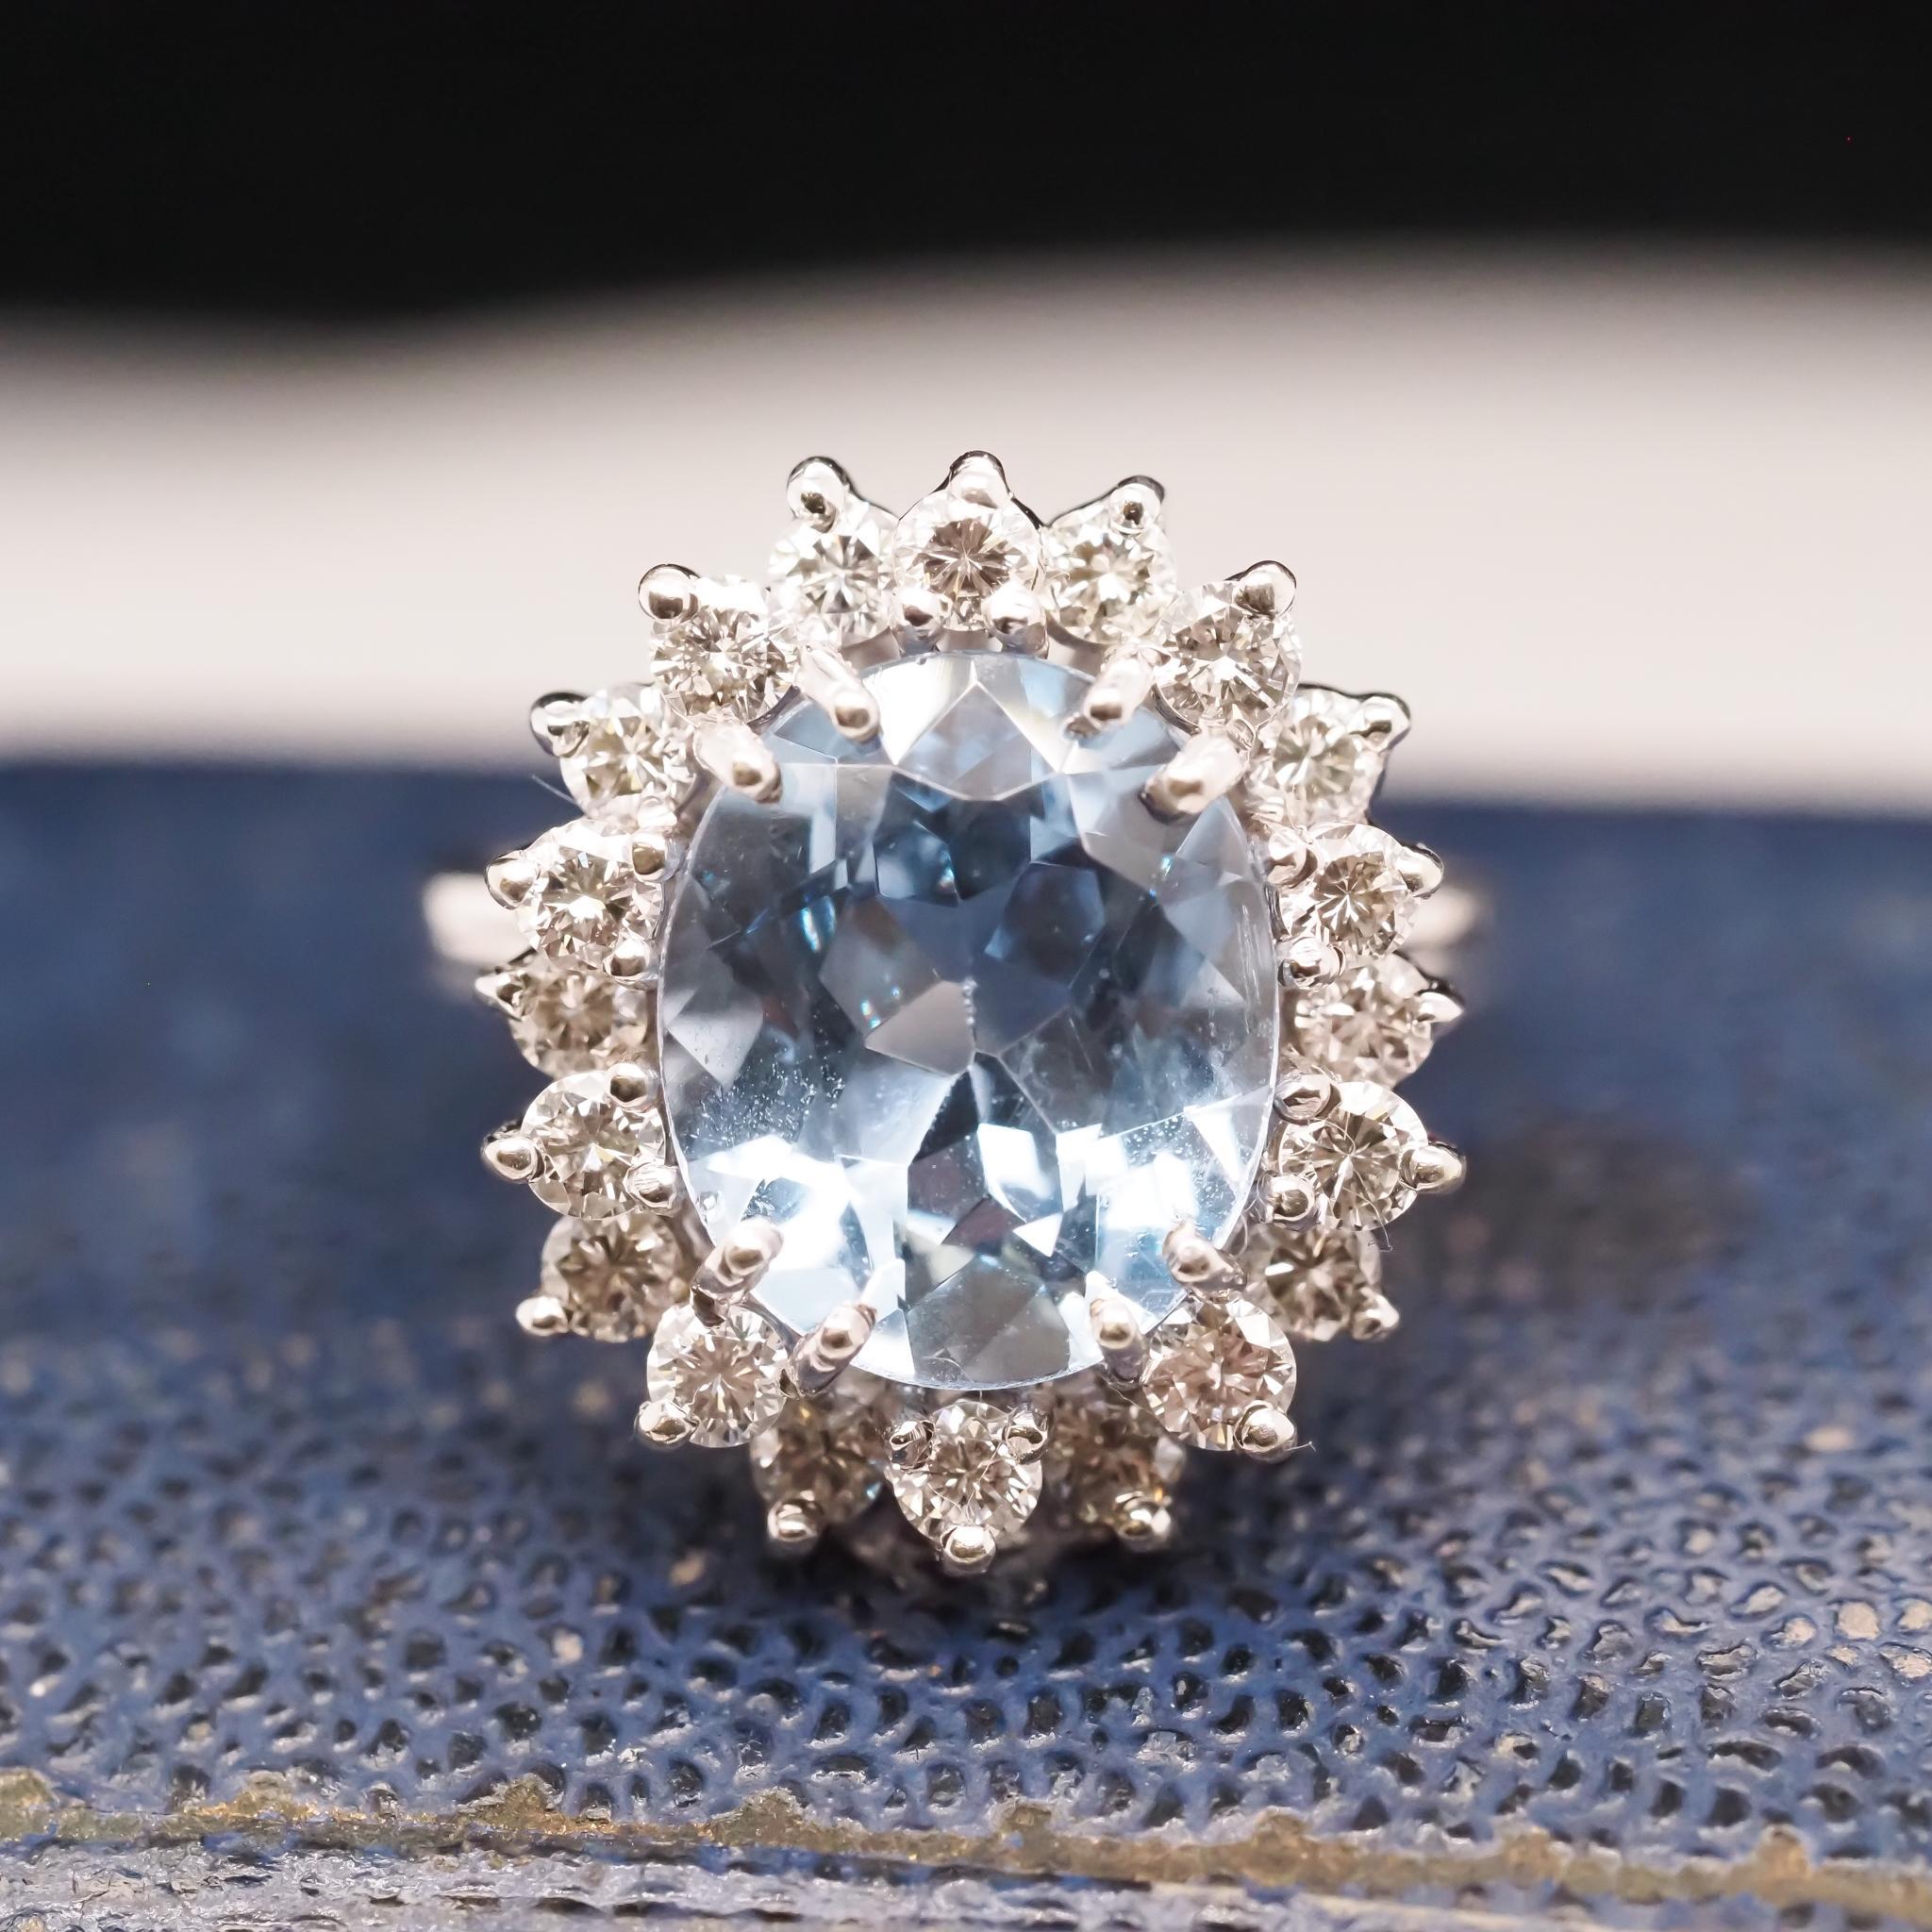 Year:
Item Details:
Ring Size: 6 (Sizable)
Metal Type: 18K White Gold [Hallmarked, and Tested]
Weight: 6.3 grams
Color Stone Details: Blue Topaz, 5ct Oval, Sky Blue.
Diamond Details: .40ct total weight, F Color, VS Clarity, Round Brilliant
Band